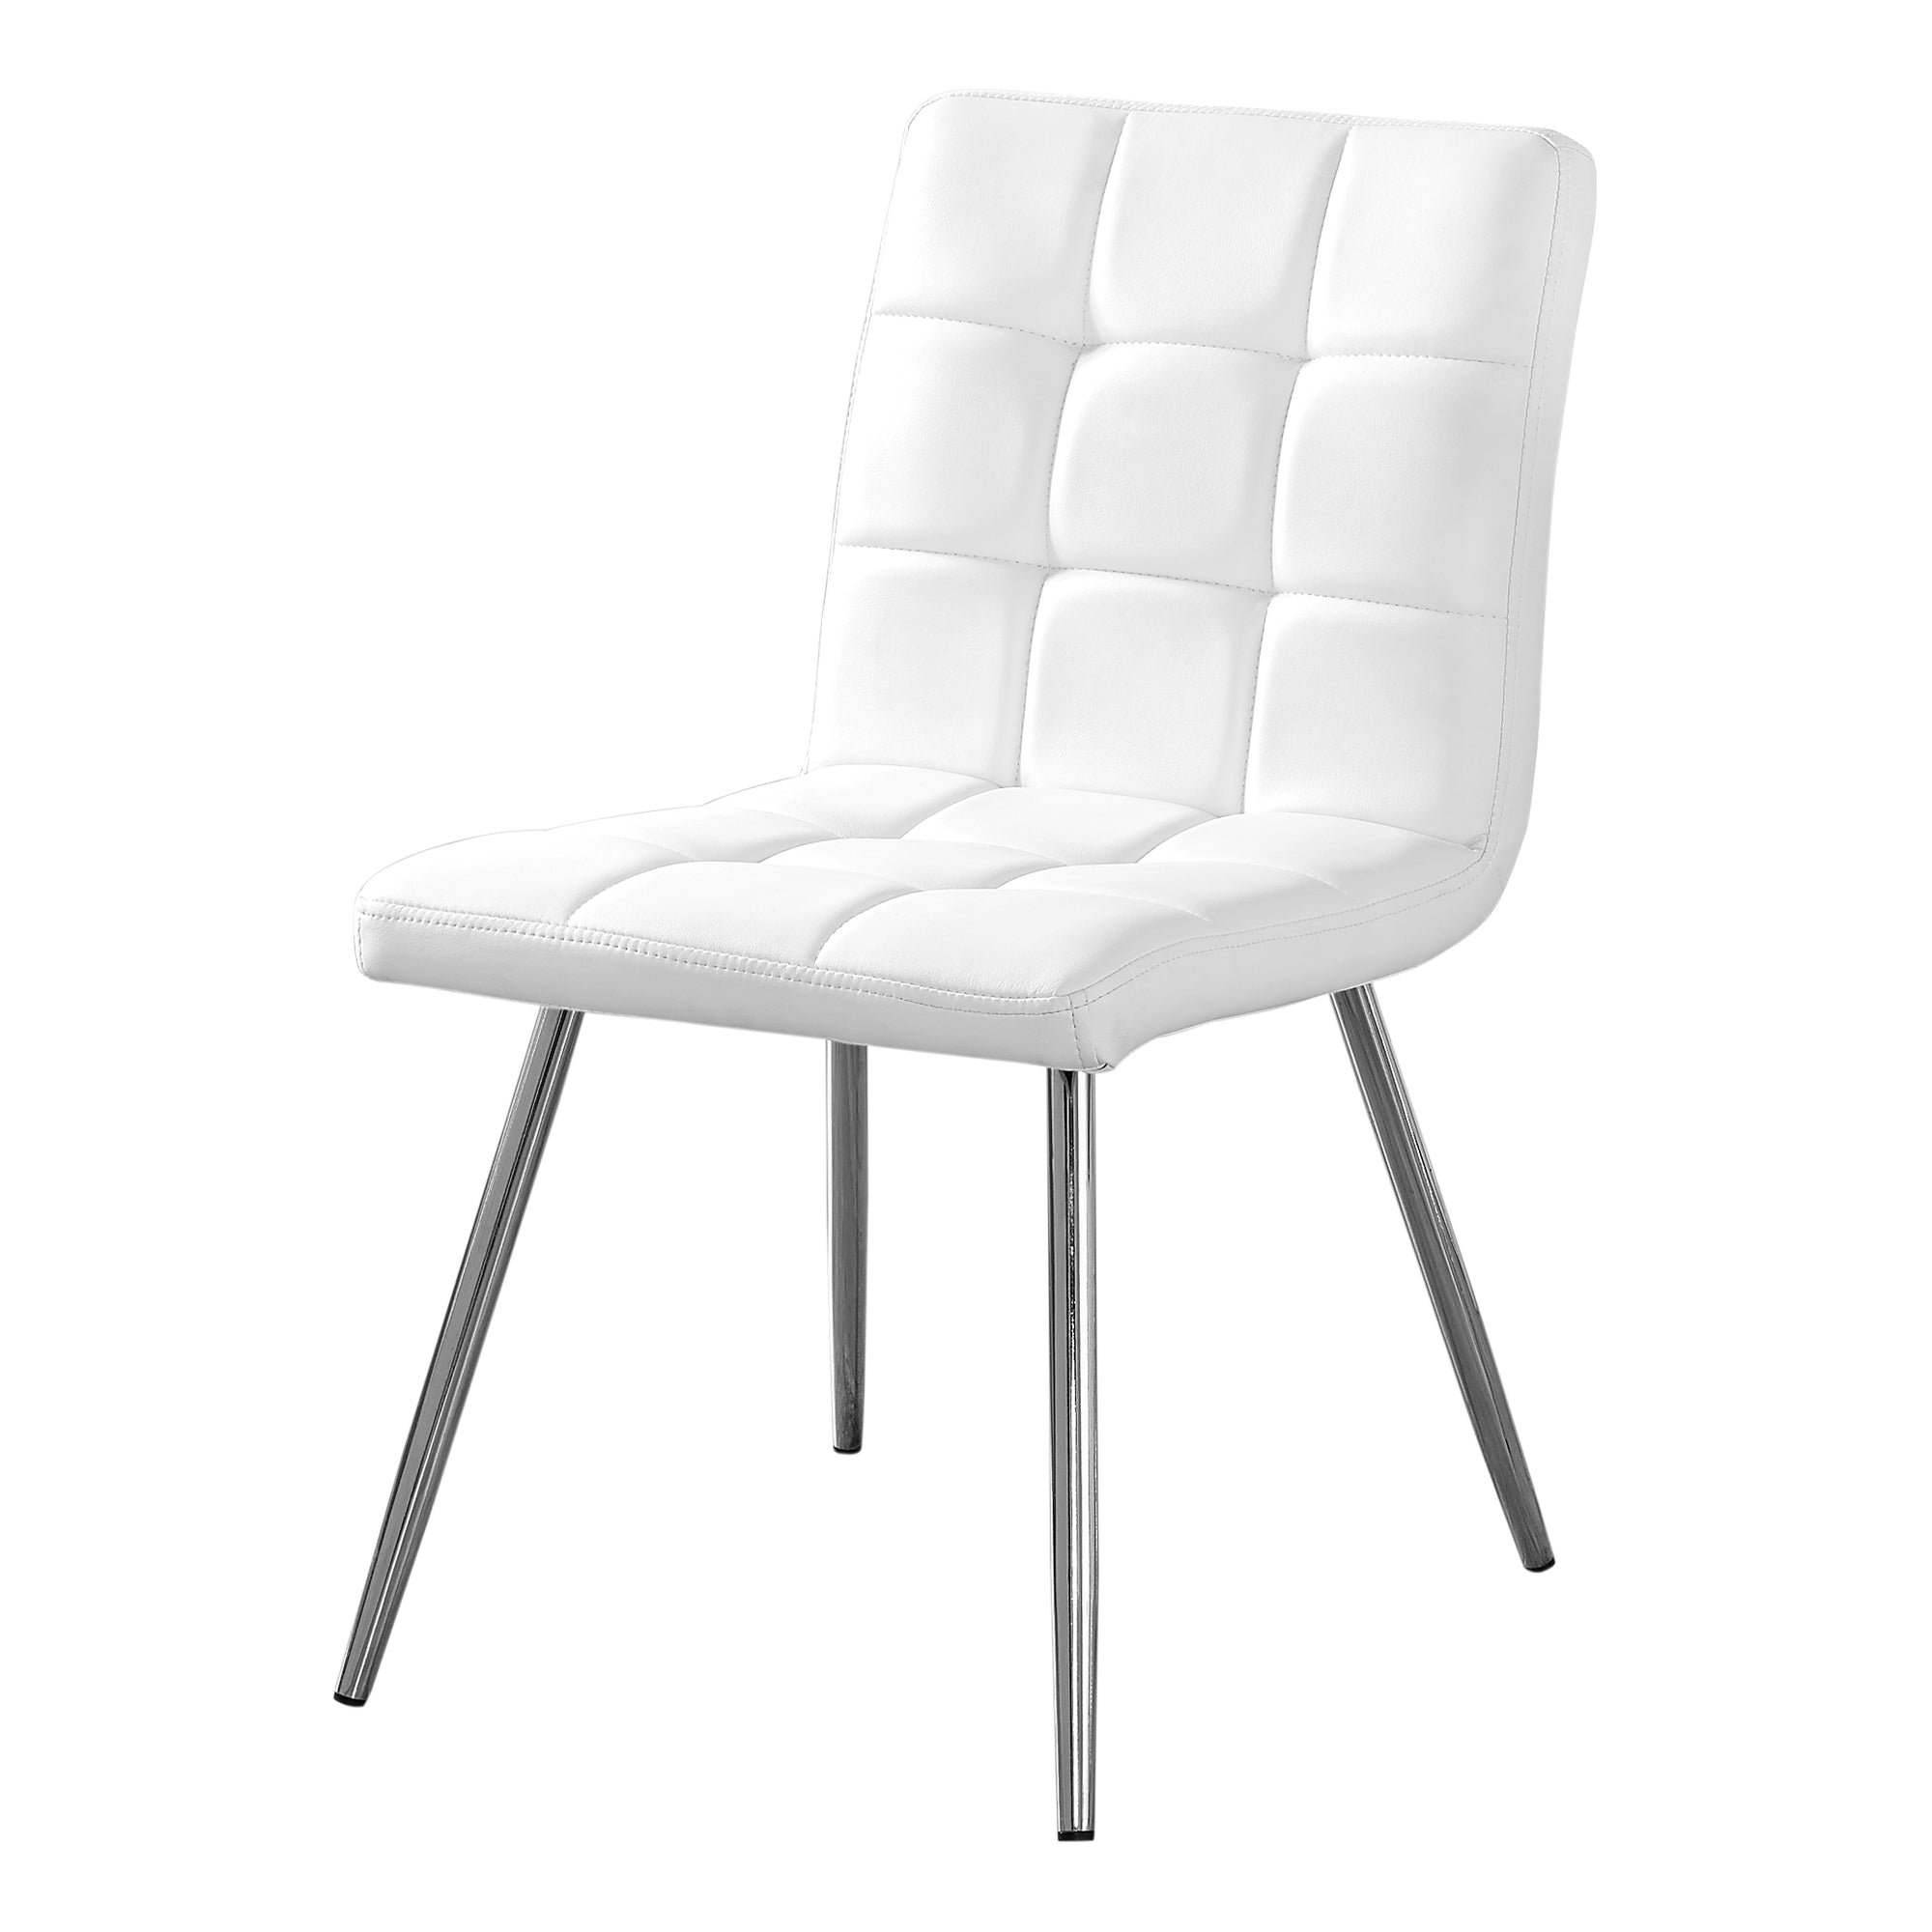 MN-361071    Dining Chair, Set Of 2, Side, Pu Leather-Look, Upholstered, Metal Legs, Kitchen, Dining Room, Leather Look, Metal Legs, White, Chrome, Contemporary, Modern